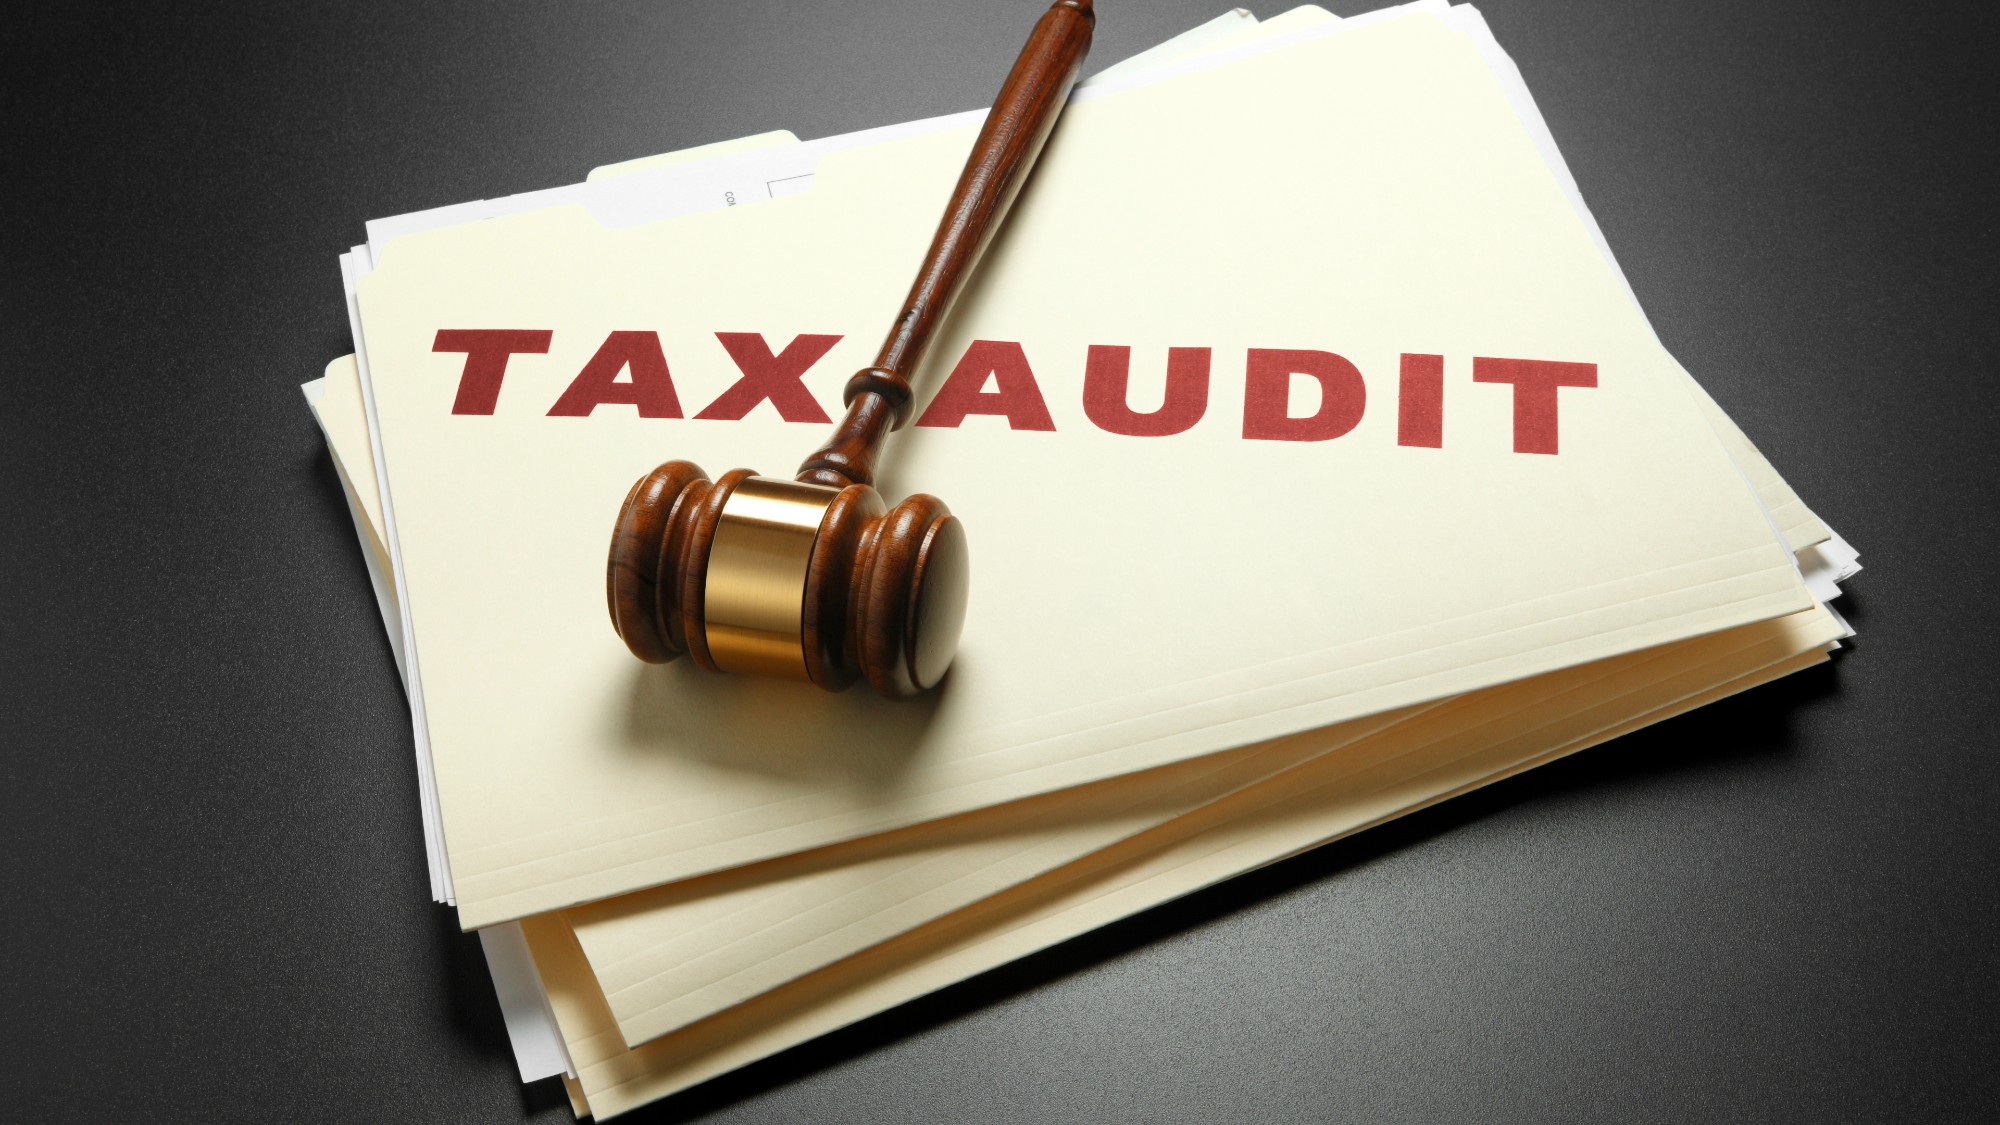  How likely are you to get audited by the IRS?  